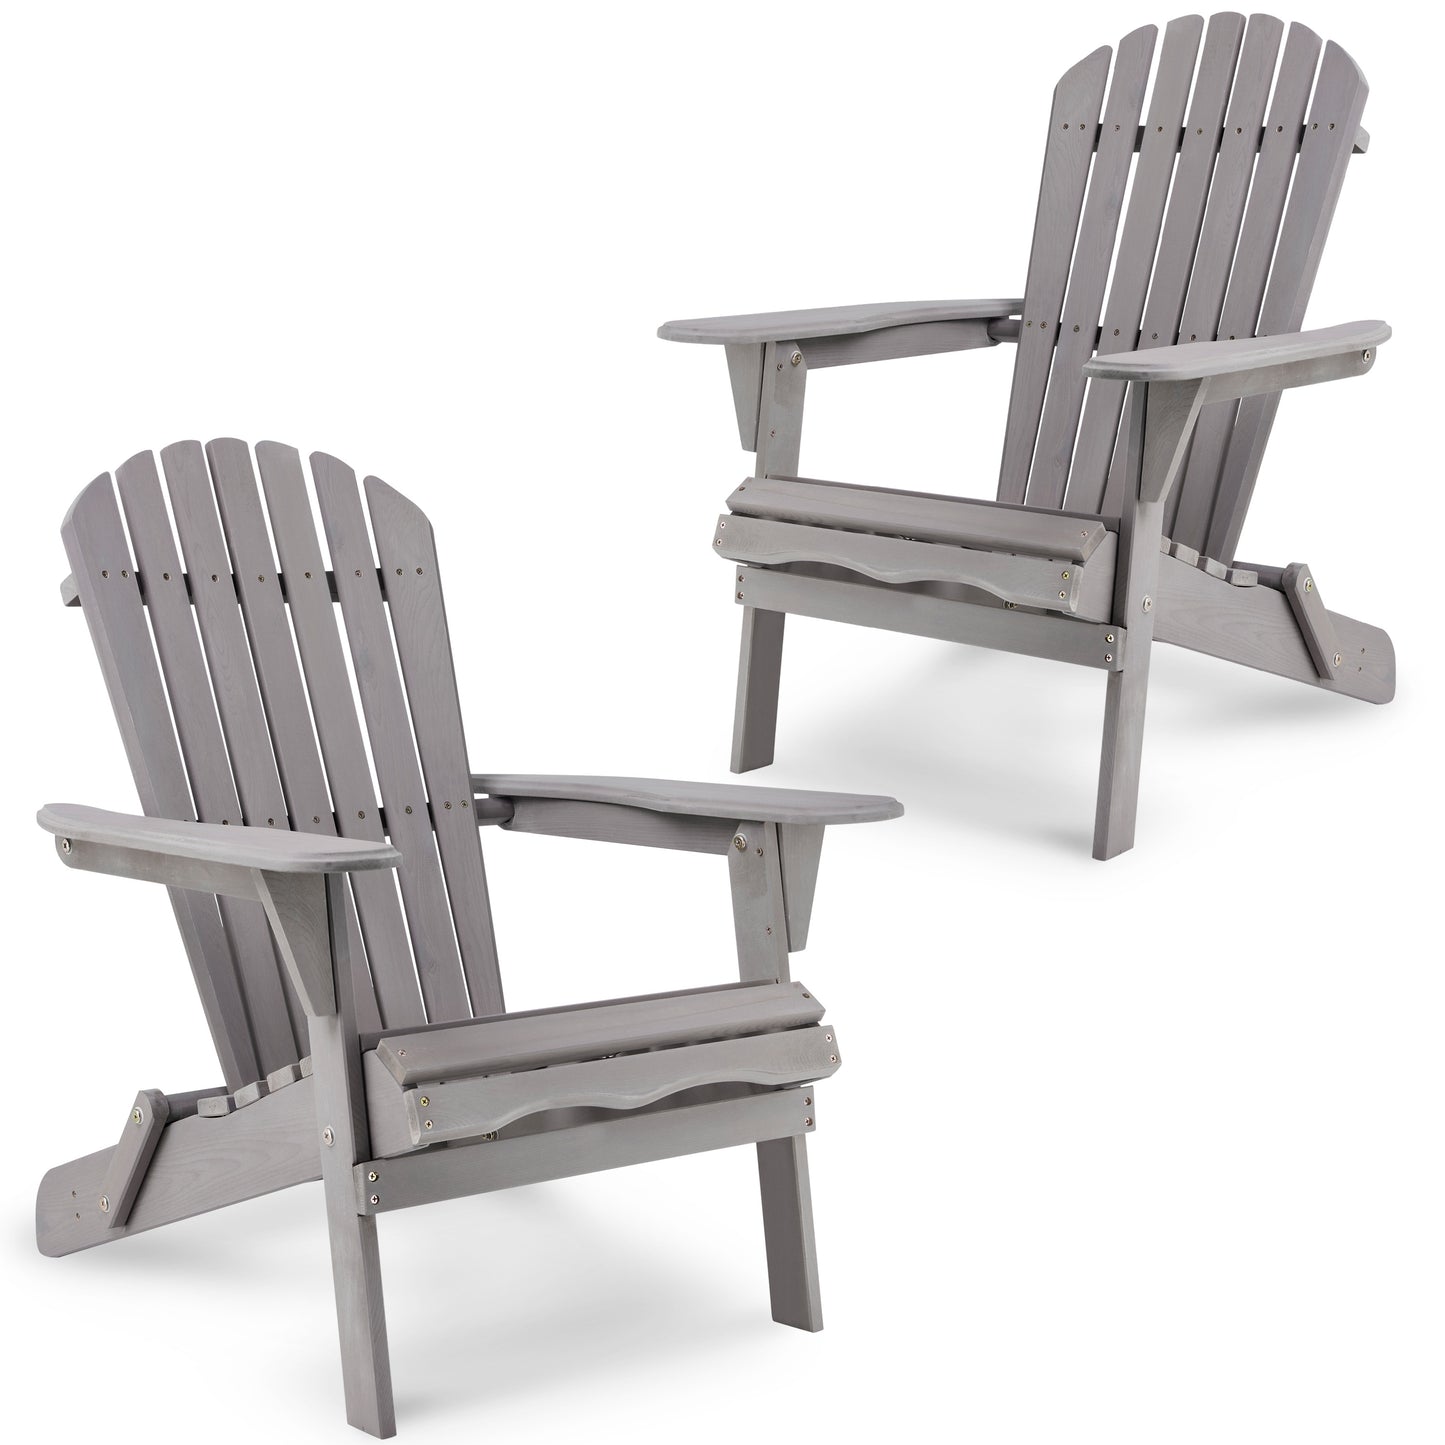 Wood Lounge Patio Chair for Garden Outdoor Wooden Folding Adirondack Chair Set of 2 Solid Cedar Wood Lounge Patio Chair for Garden, Lawn, Backyard,